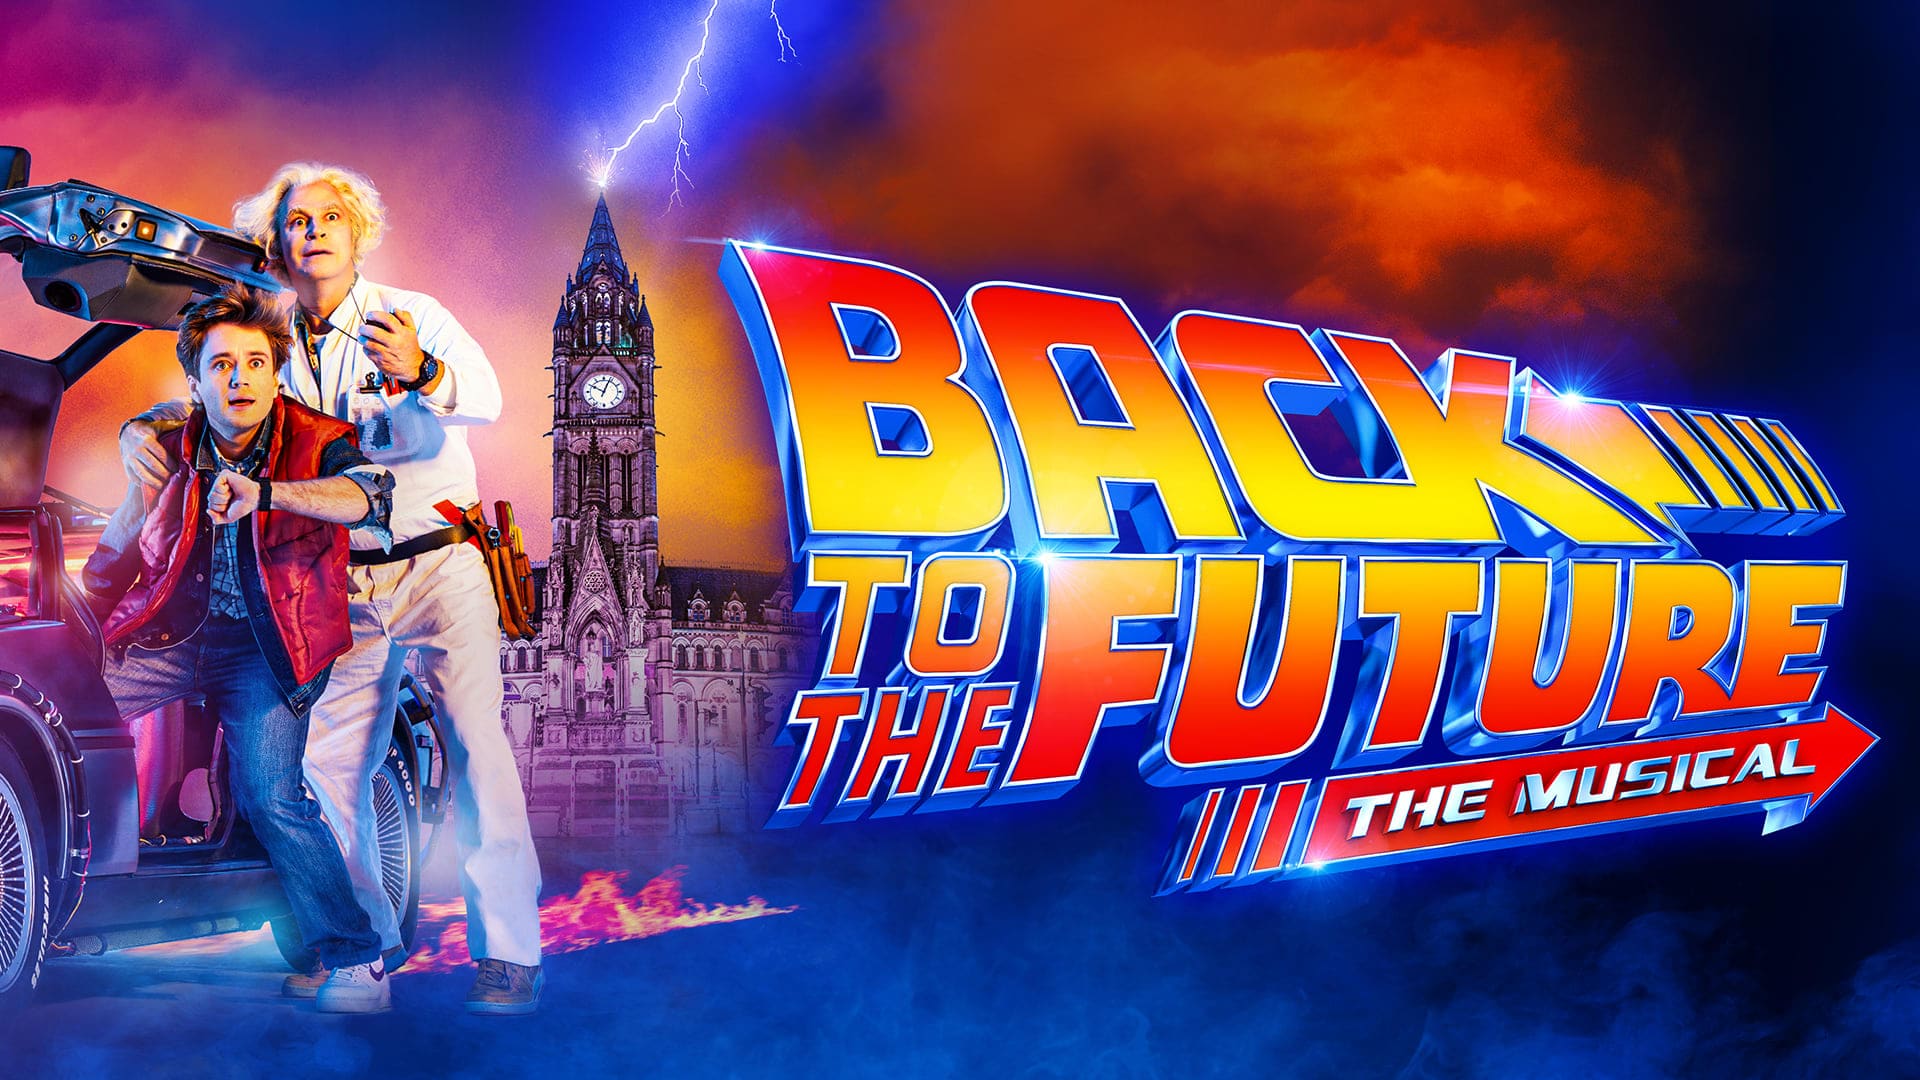 Back To The Future To Release Original Cast Recording Rewrite This Story